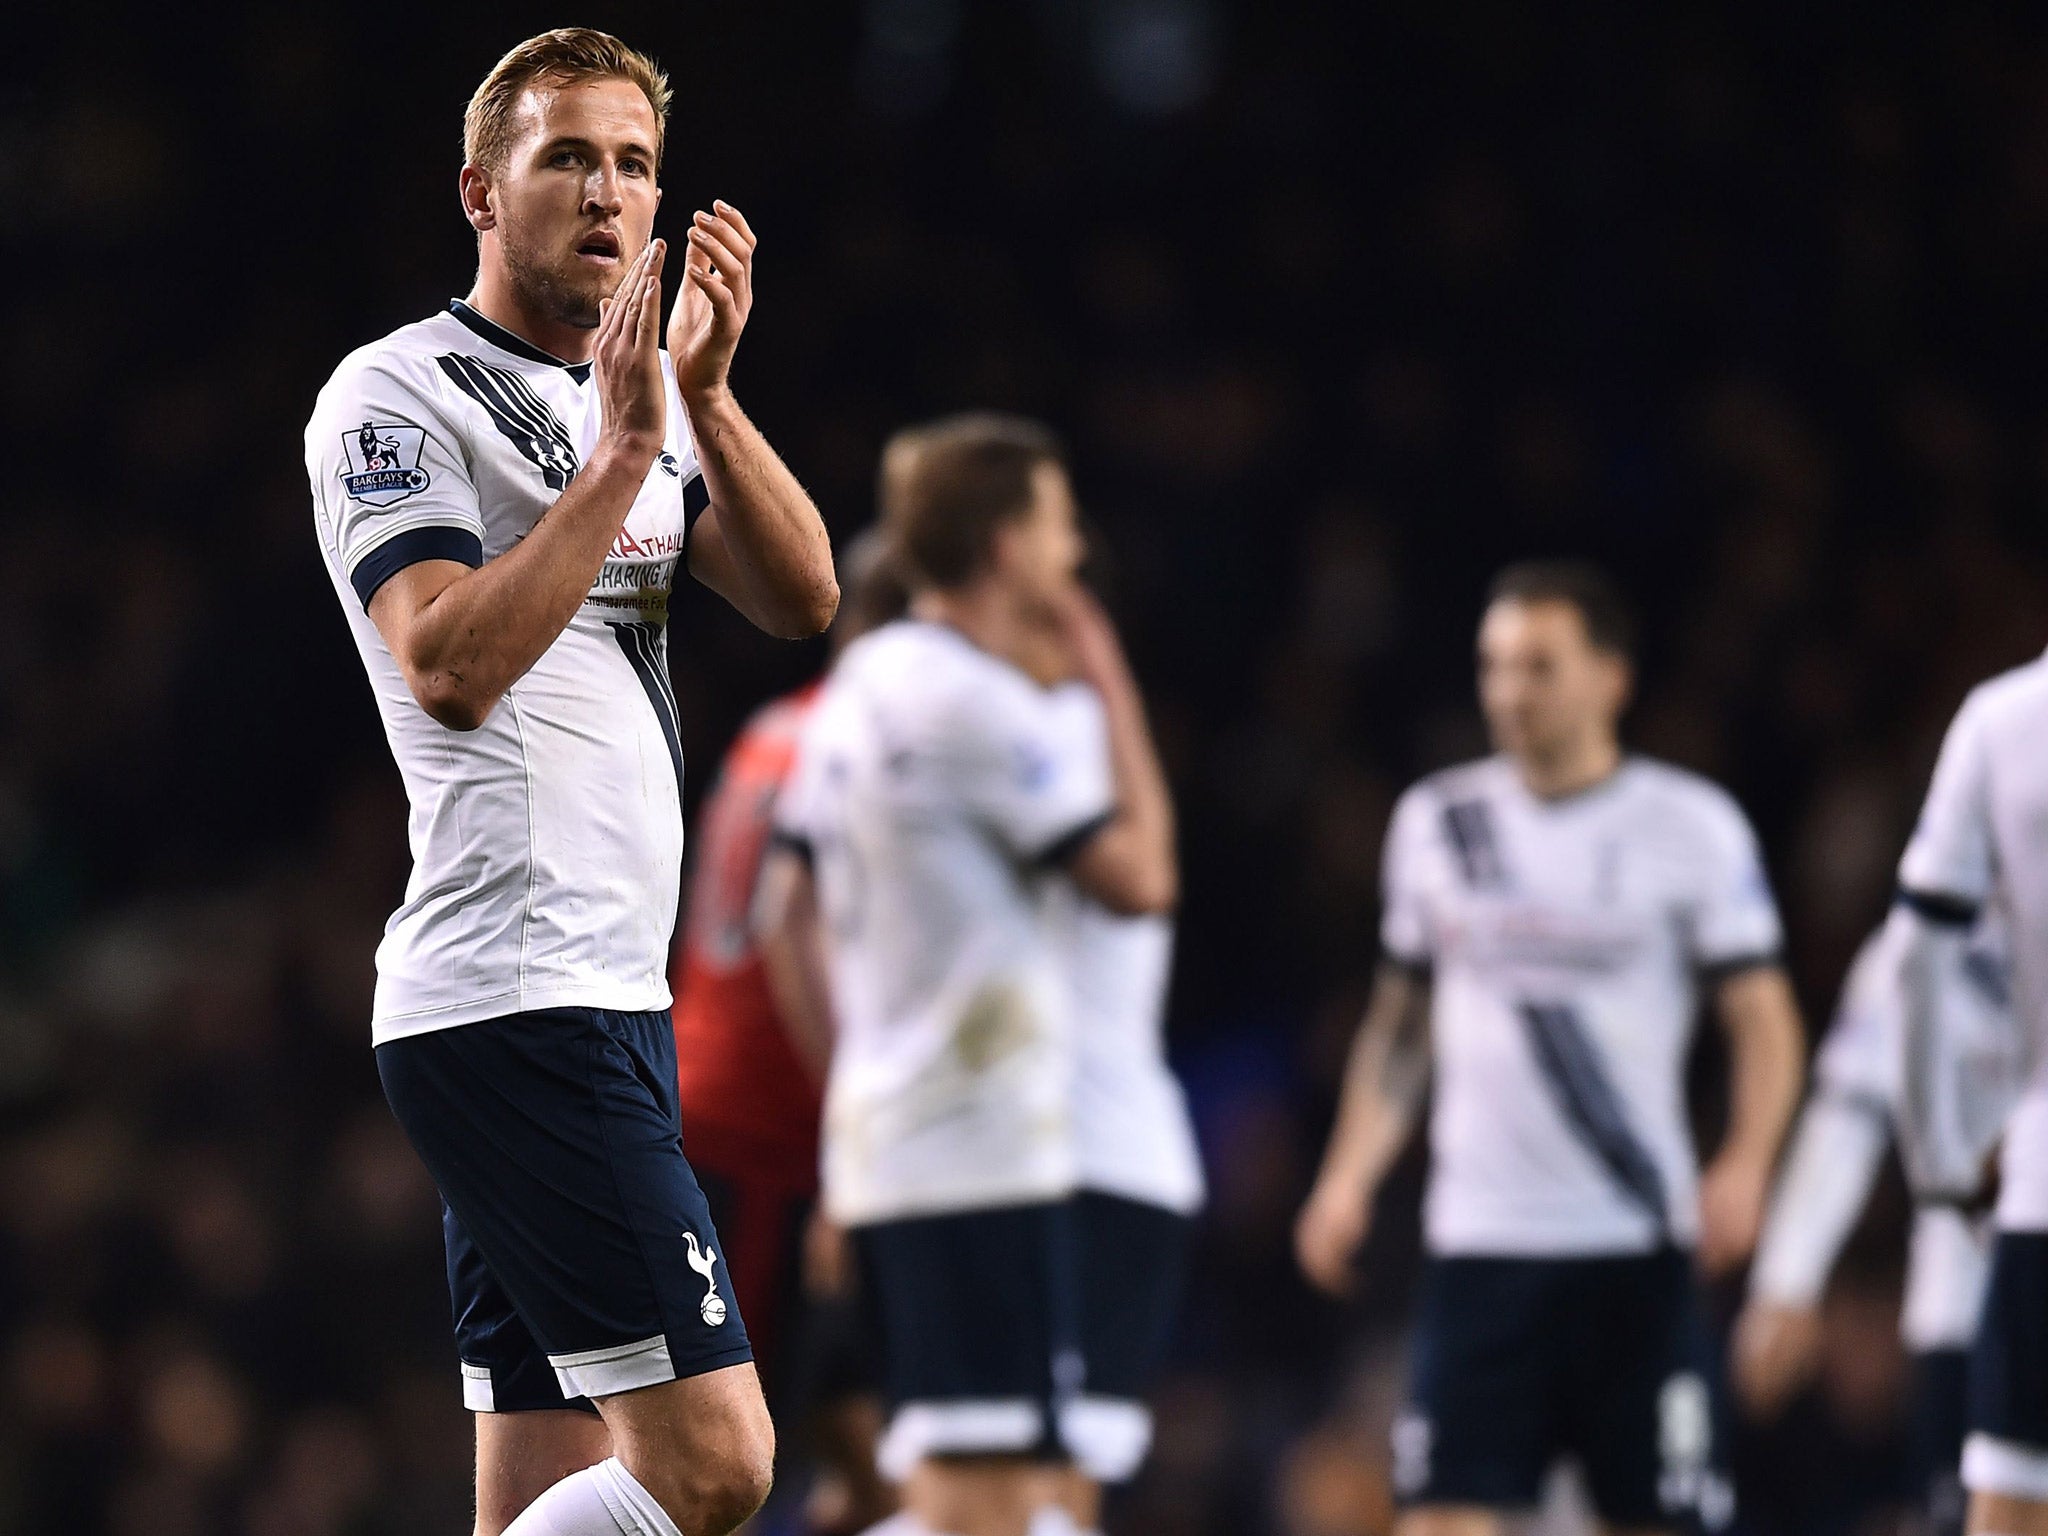 Harry Kane would be the prefect replacement for Gonzalo Higuain at Napoli, says Diego Maradona